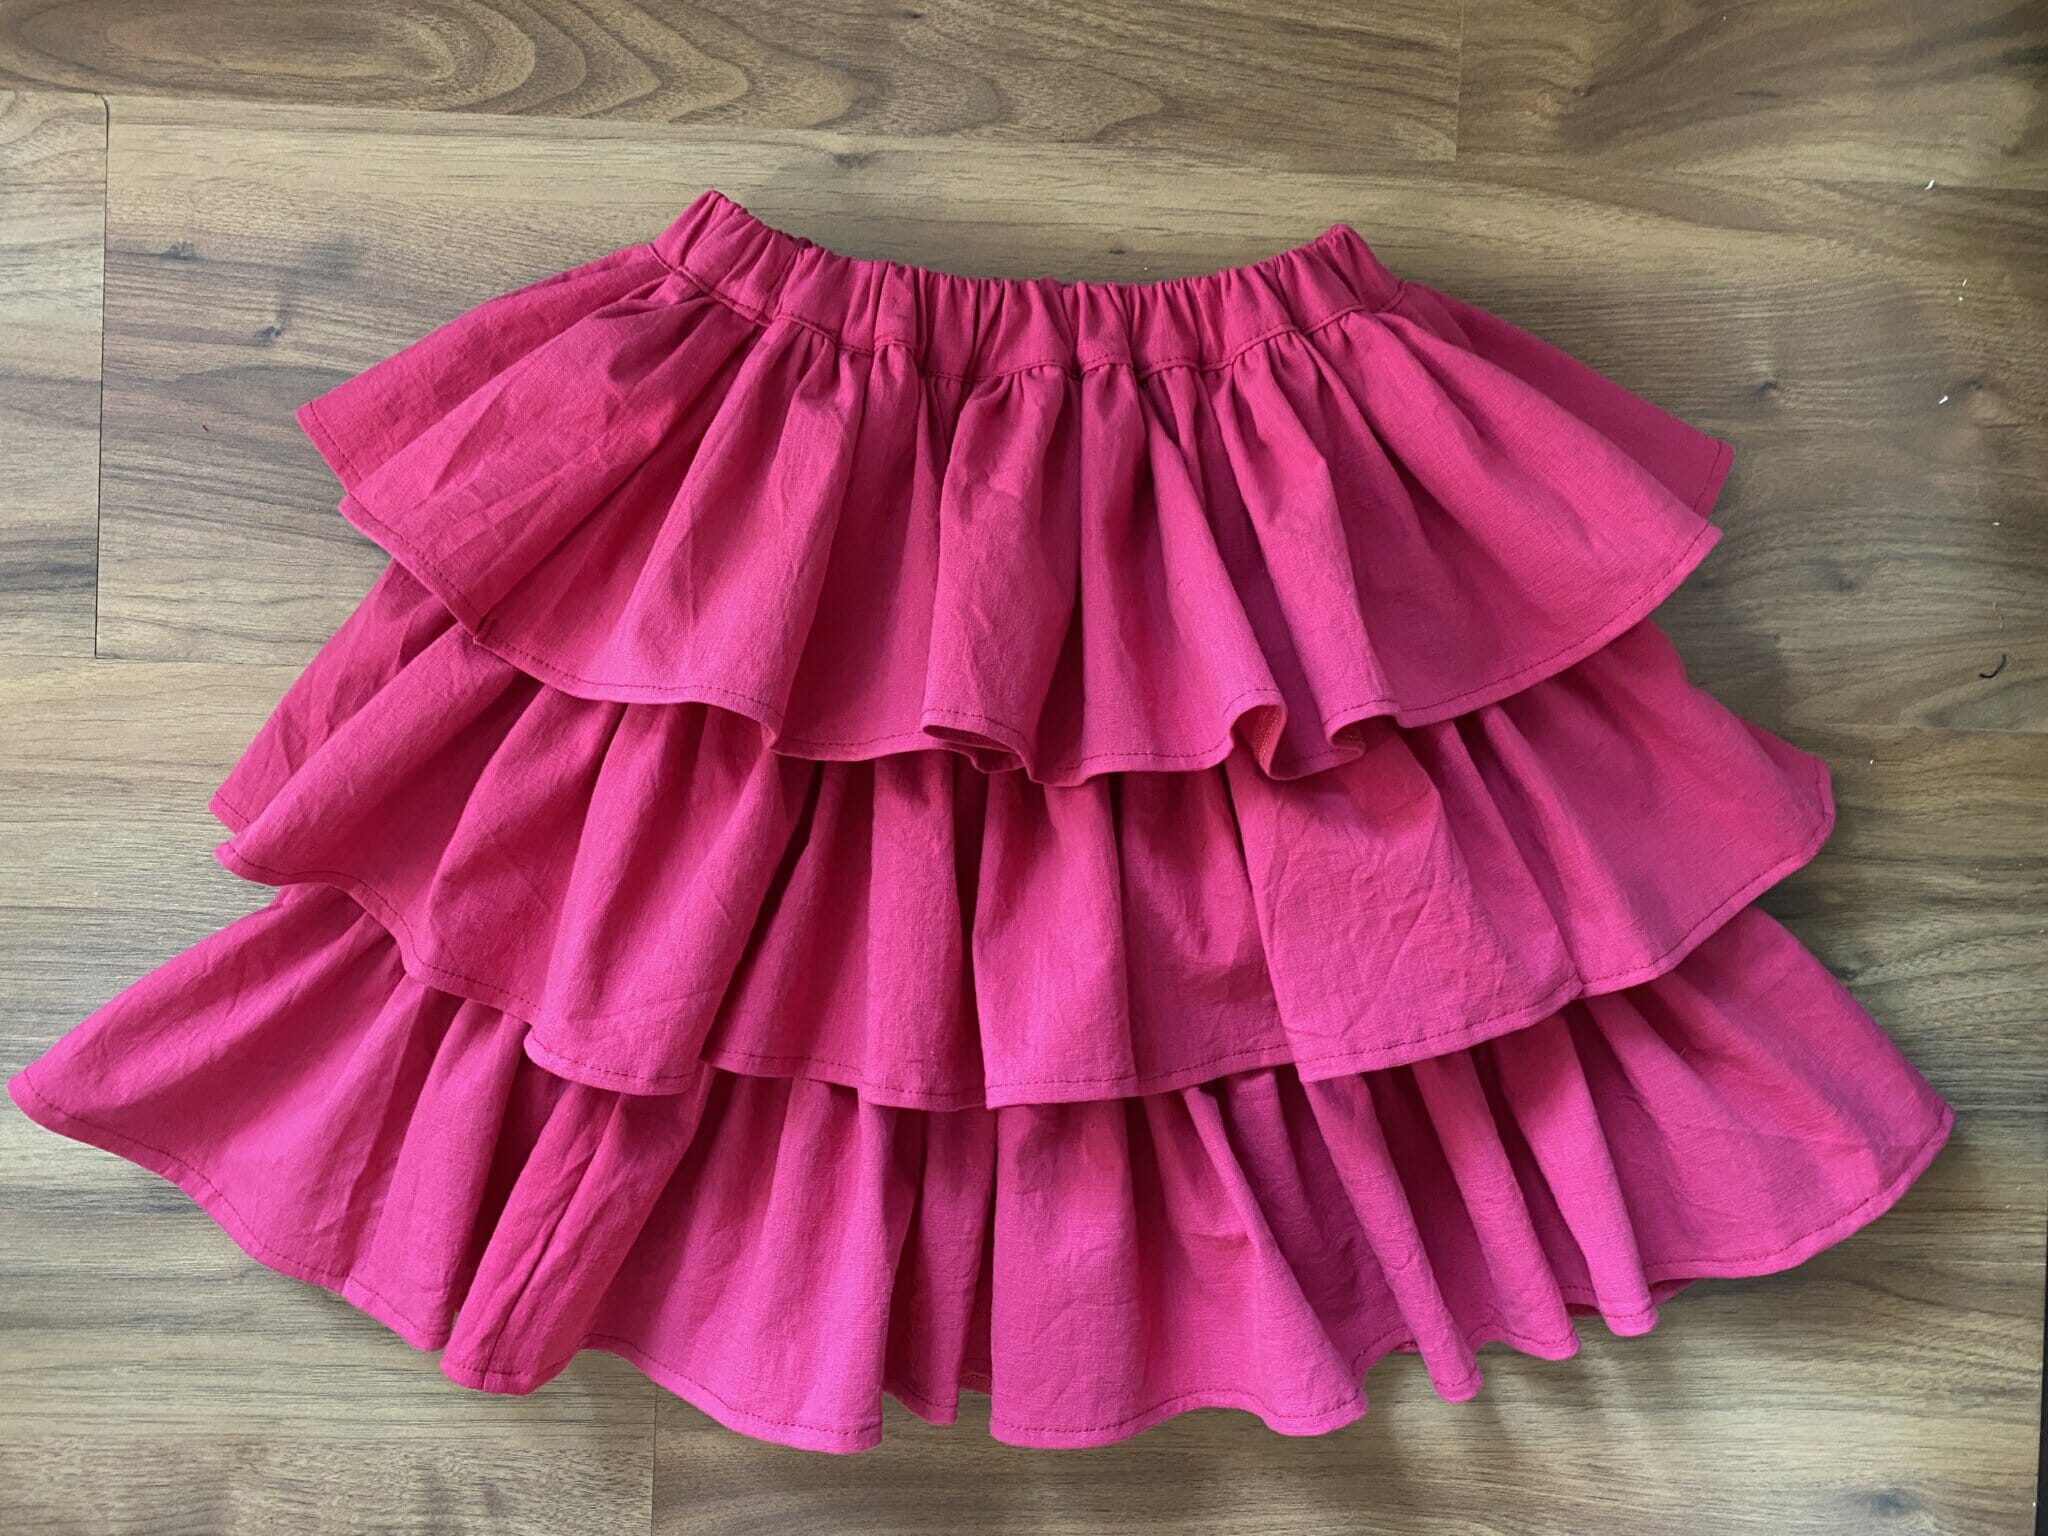 DIY tutorial: Tiered ruffle skirt with elastic waistband - I Can Sew This